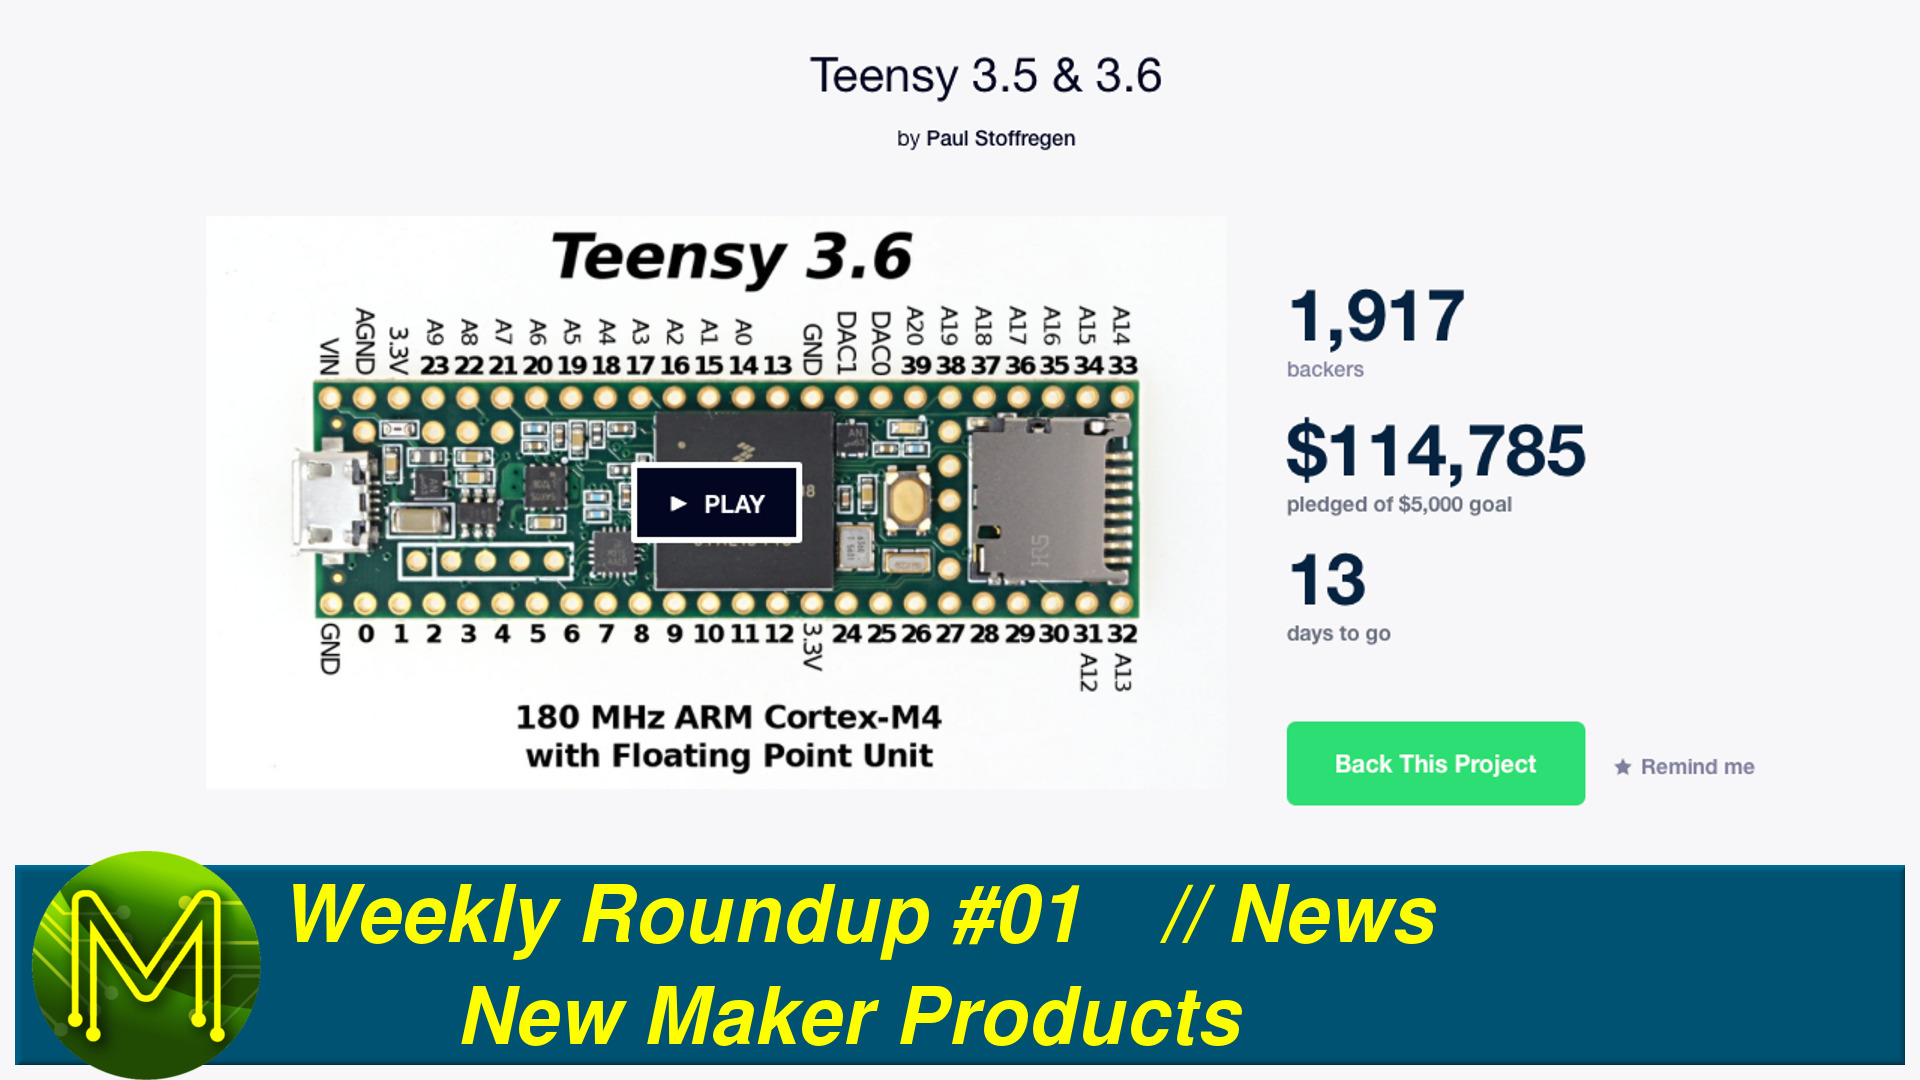 Weekly Roundup #01 - New Maker Products // News